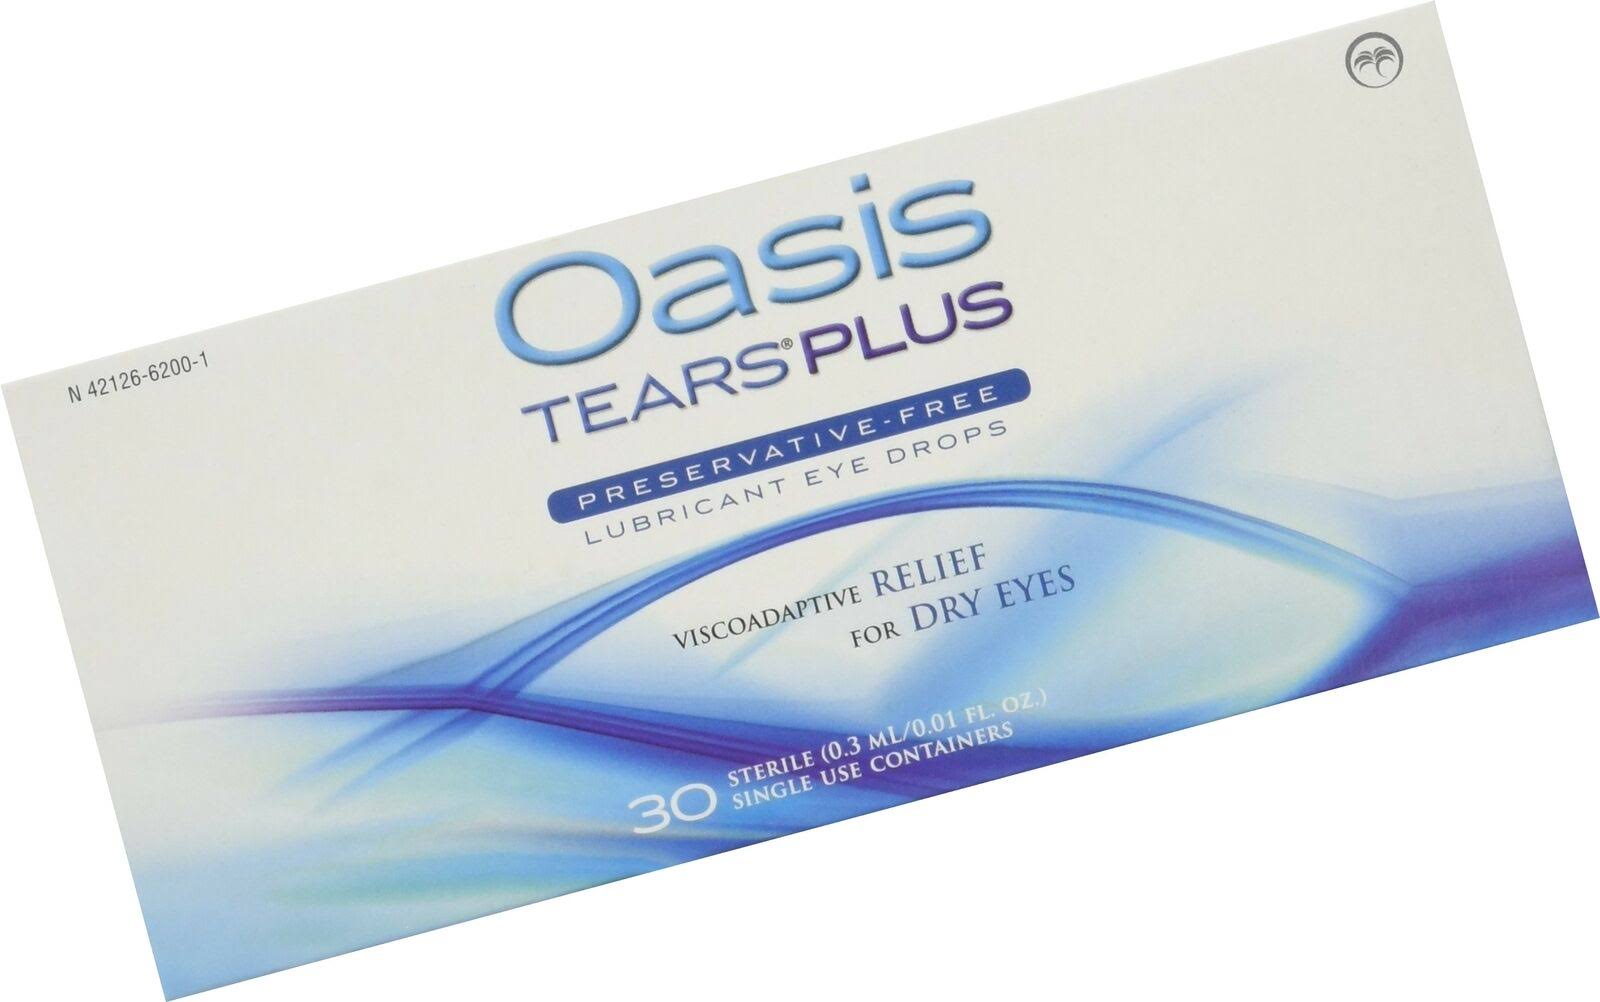 Oasis Tears Plus Lubricant Eye Drops Preservative-Free 30 Containers, 0.3 Ml/0.01 fl oz